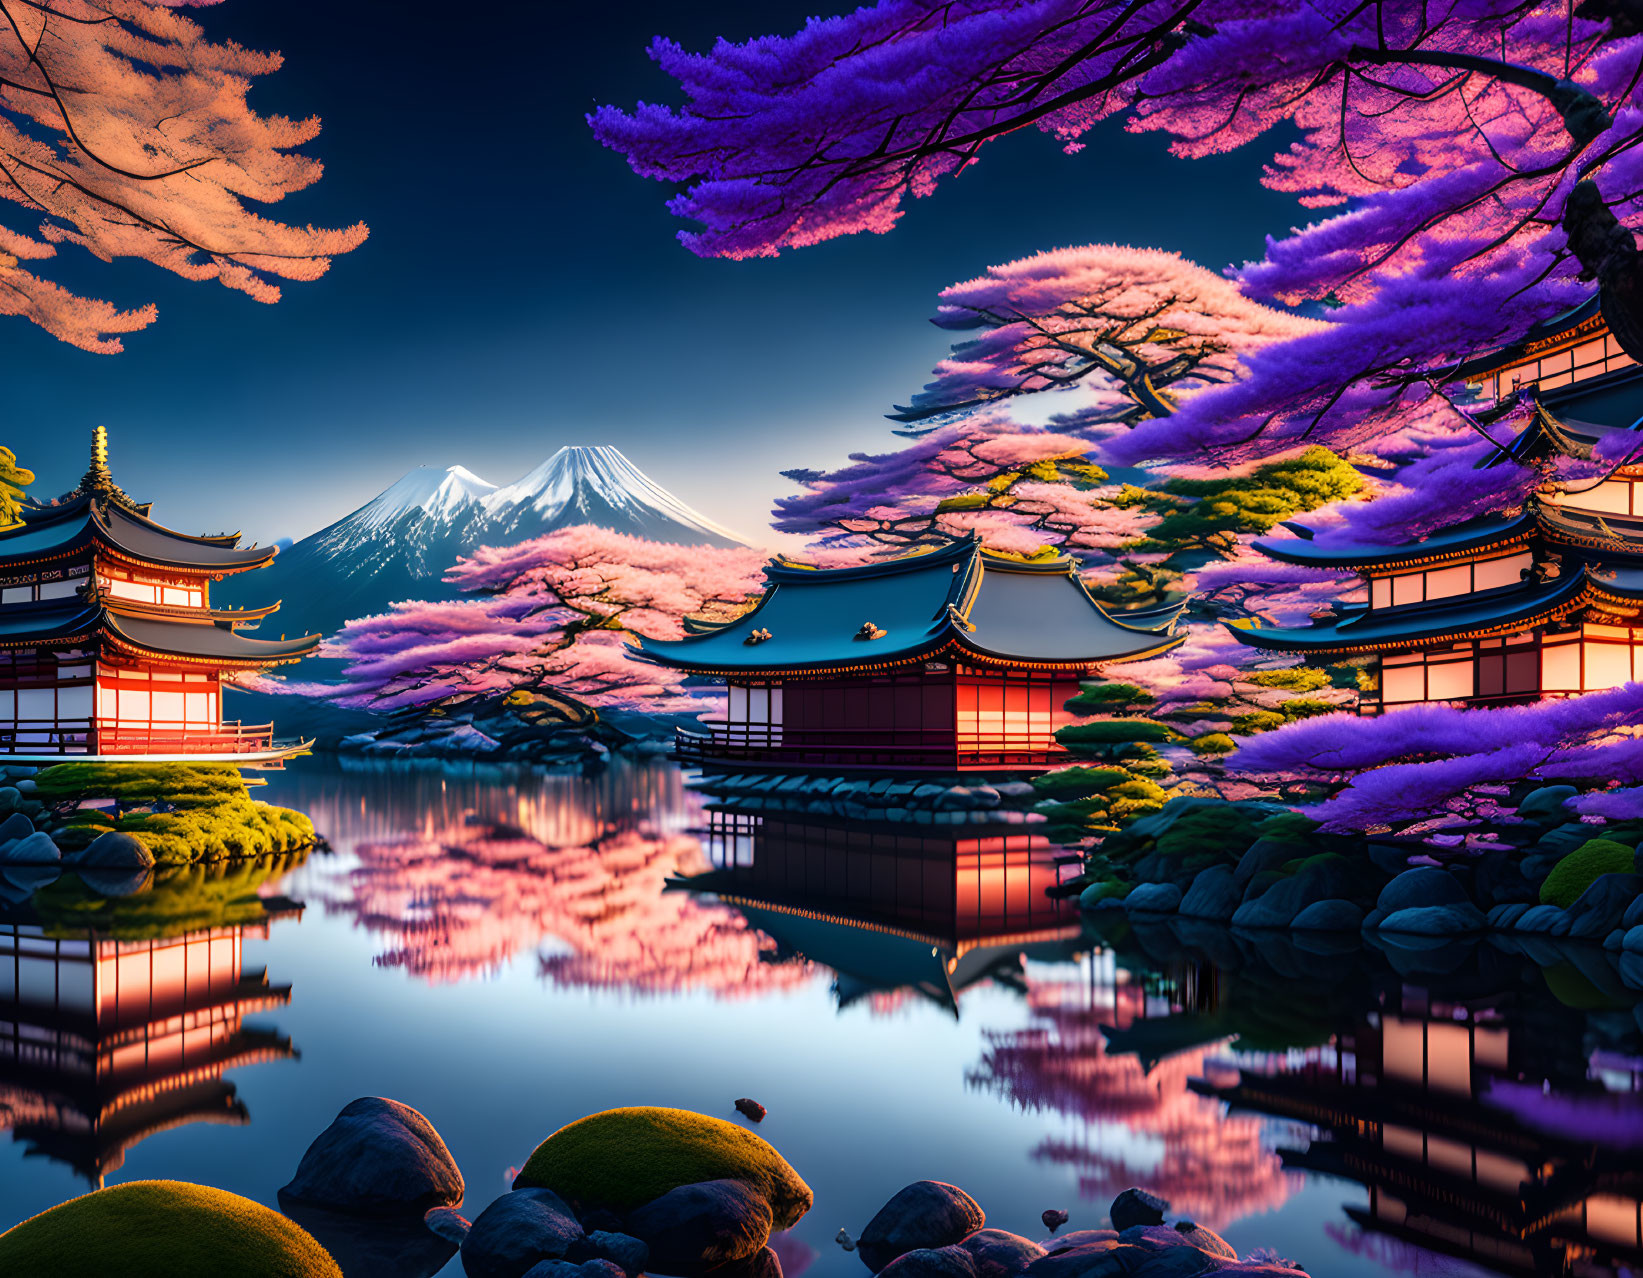 Traditional Japanese buildings, Mount Fuji, cherry blossom trees, and serene lake scene.